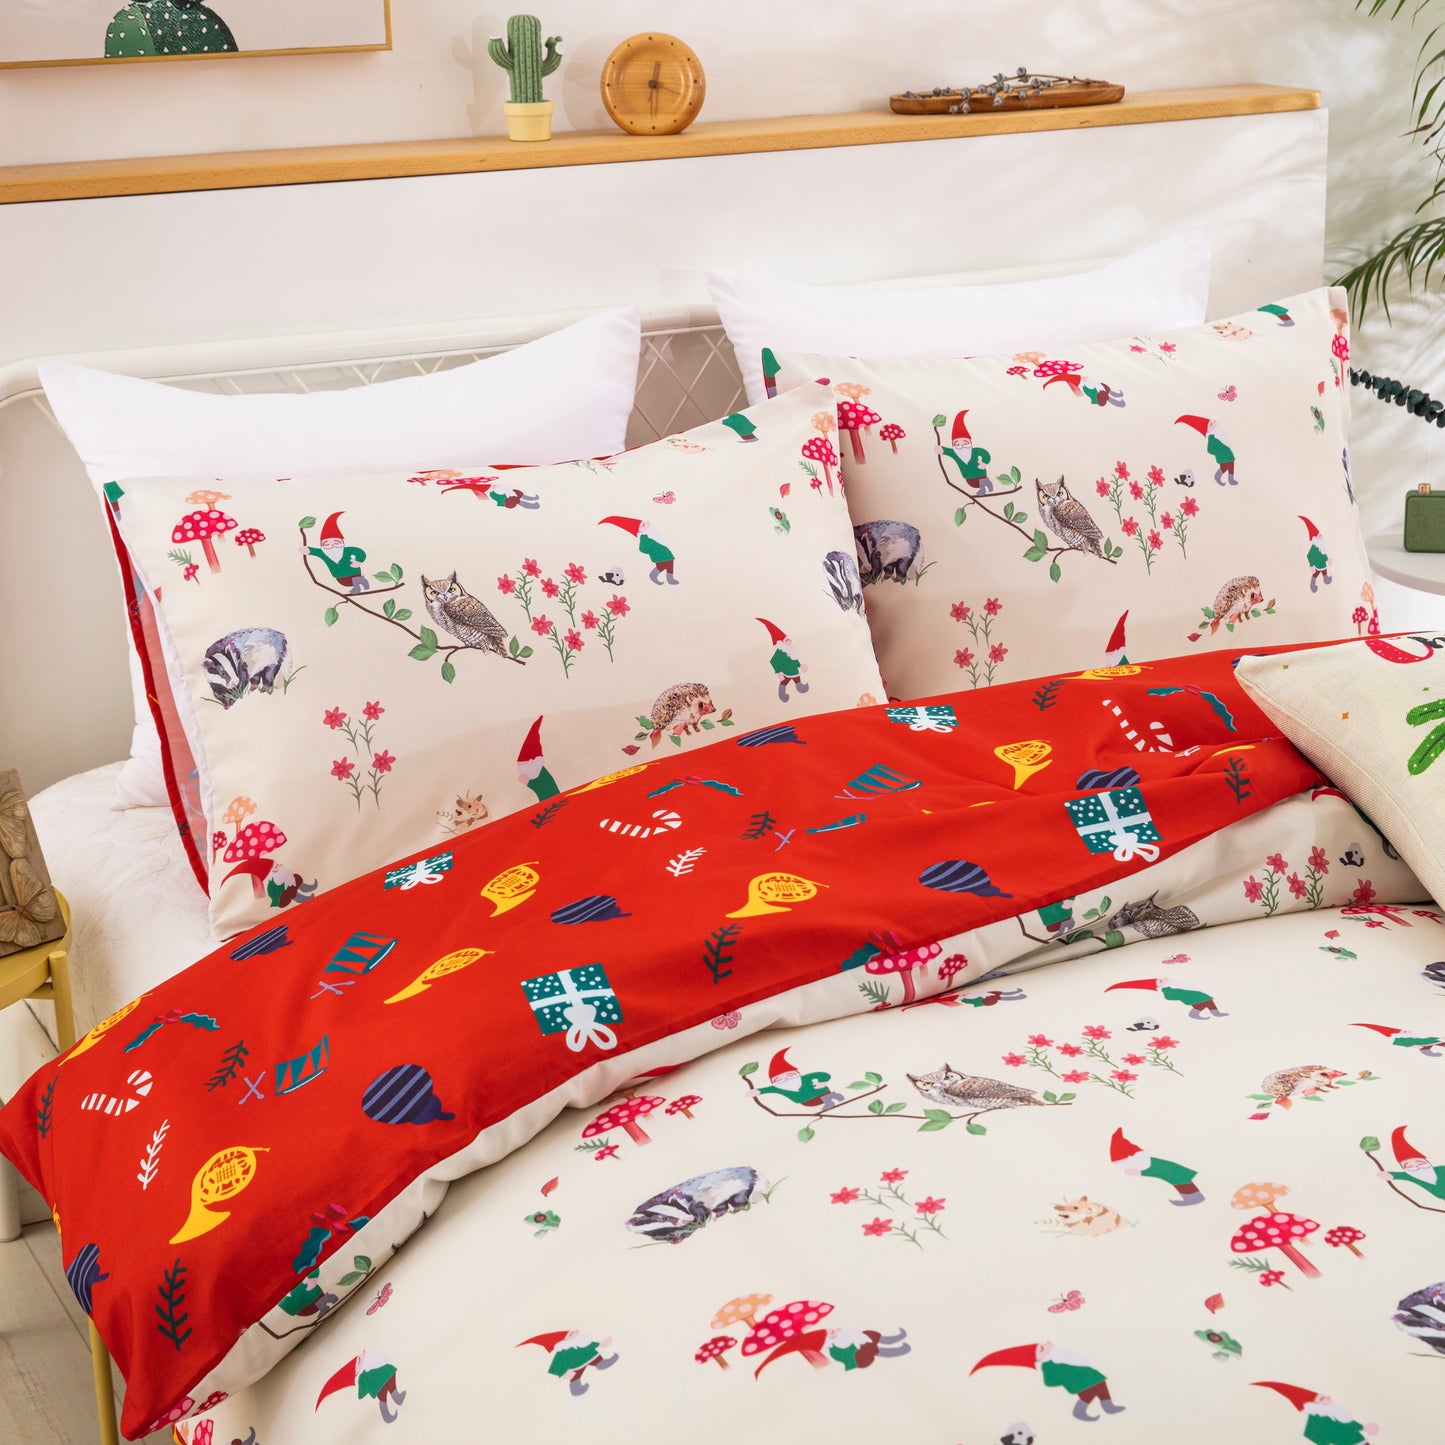 WONGS BEDDING Double-sided Christmas Elements Duvet Cover Set